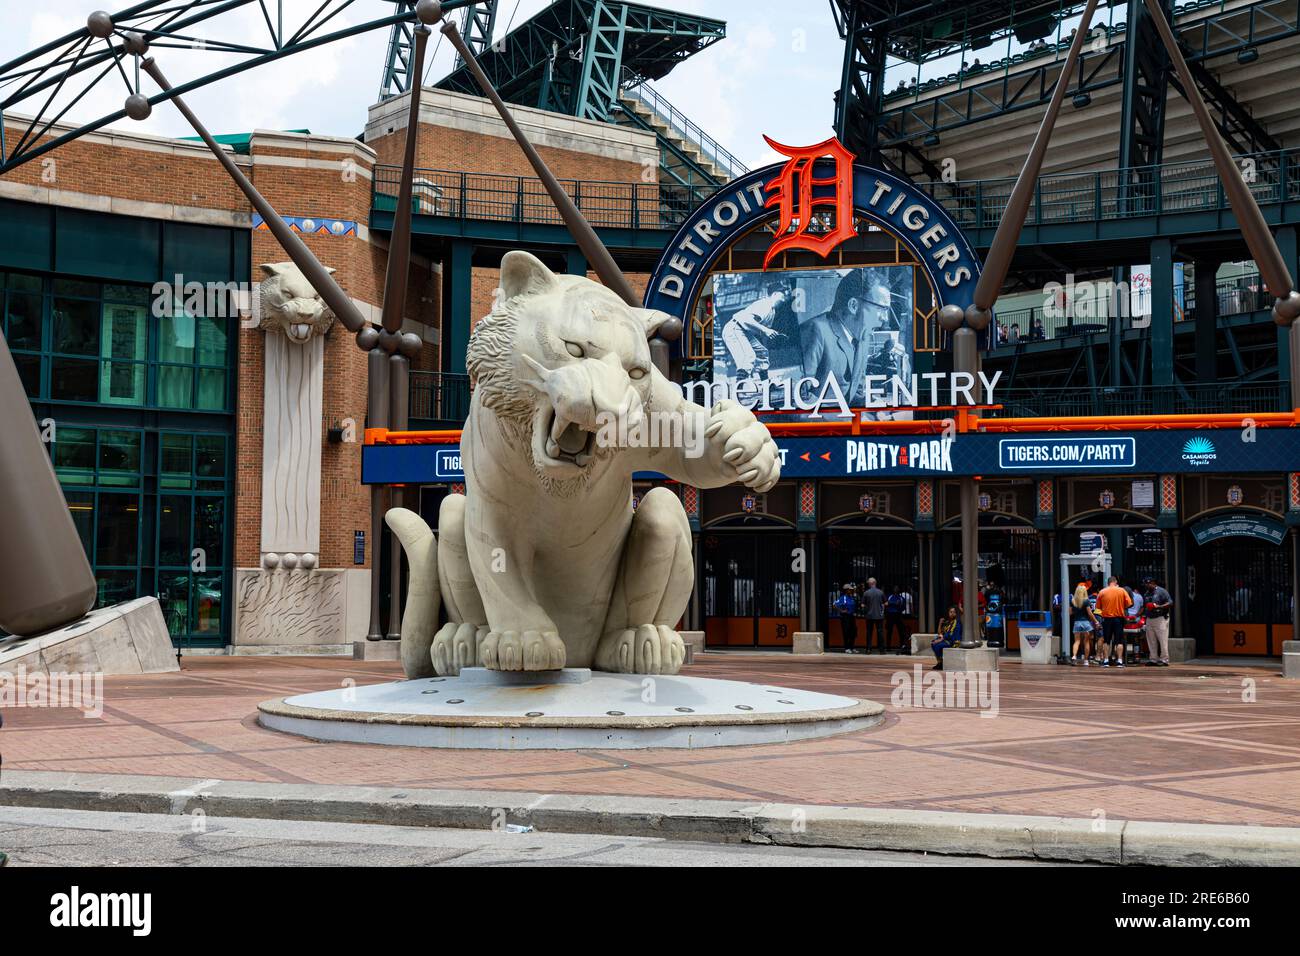 The Sporting Statues Project: Charlie Gehringer: Detroit Tigers, Comerica  Park, Detroit, MI